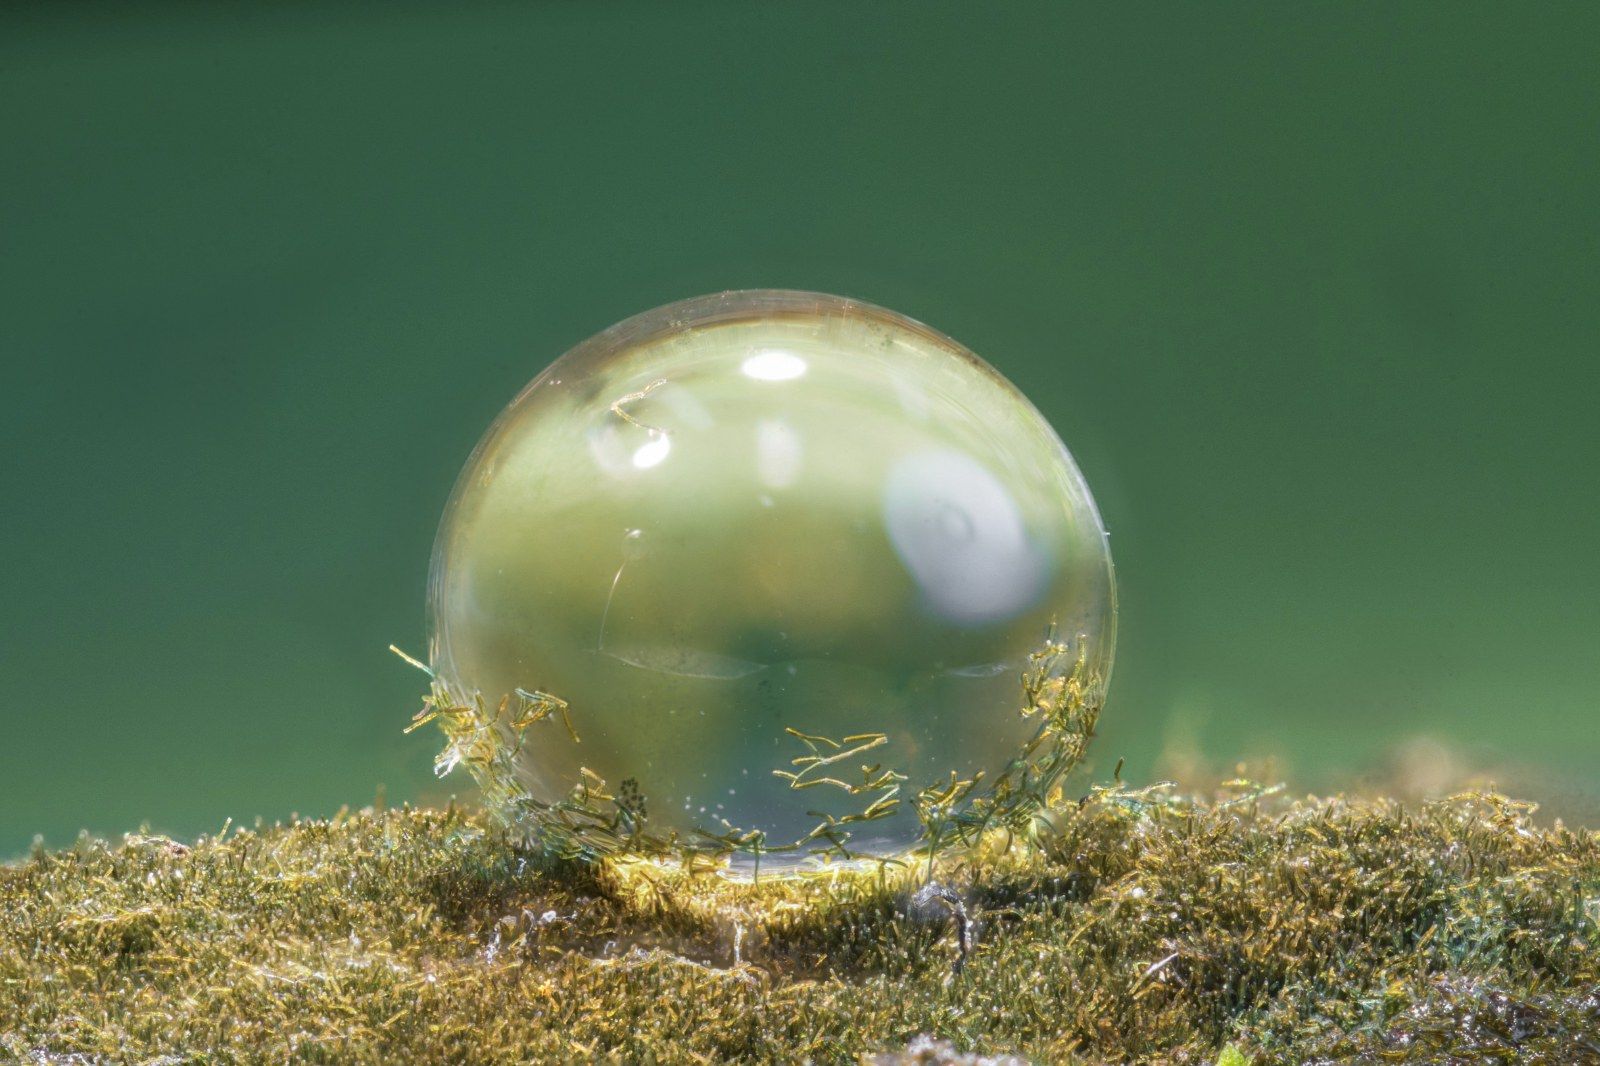 Water droplets remain spherical on the superhydrophobic biofilm